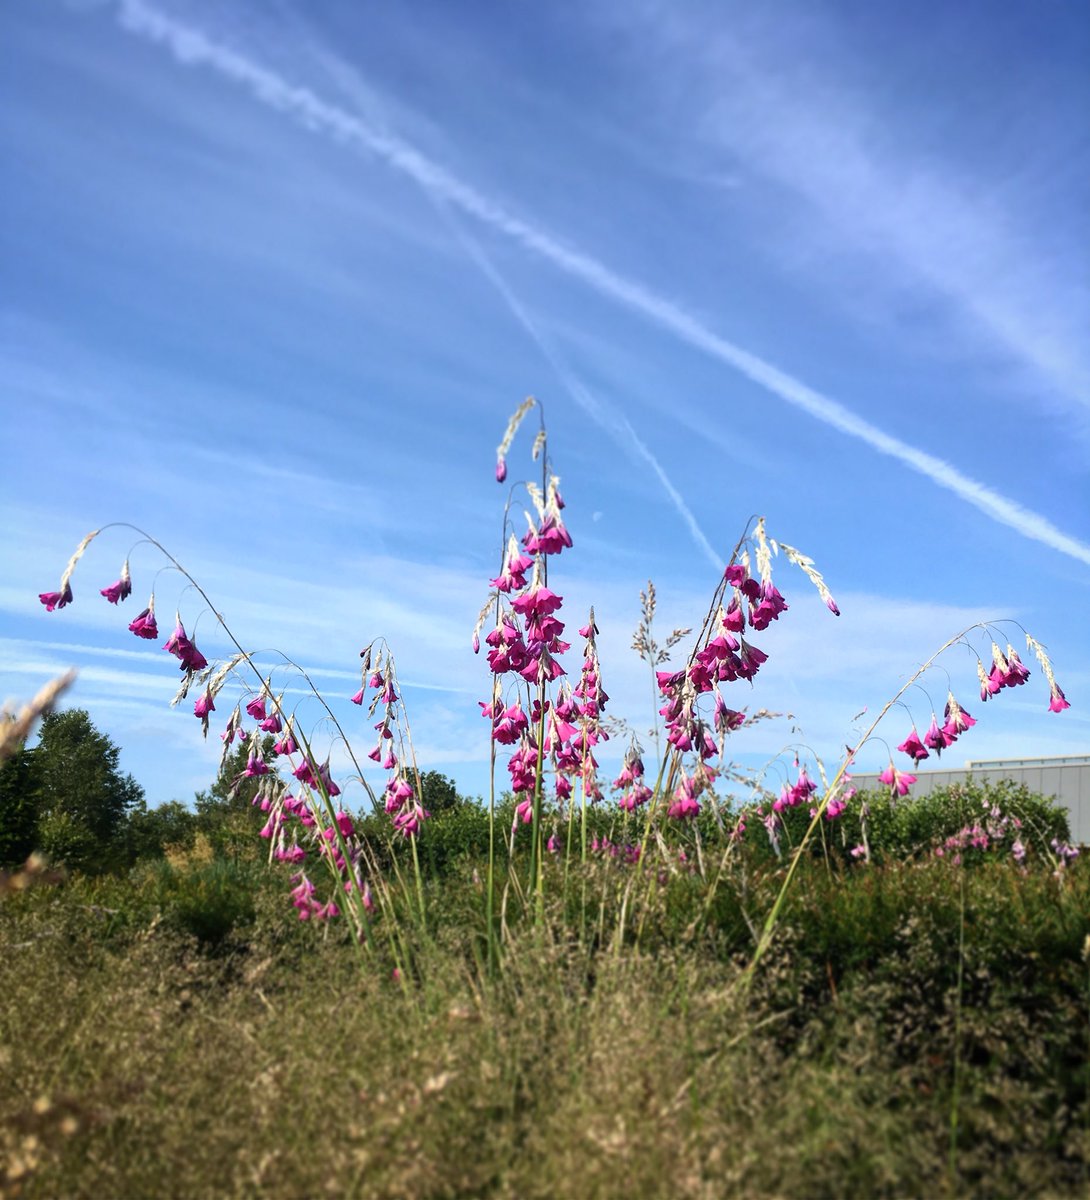 The angels fishing rod are looking absolutely spot on at the moment @RHSHydeHall #dierama #dieramapulcherrimum #angelsfishingrod #moderncountrygarden #courtyardgarden #rhshydehall #rhsgardenhydehall #rhs #royalhorticulturalsociety #comeseeforyourself